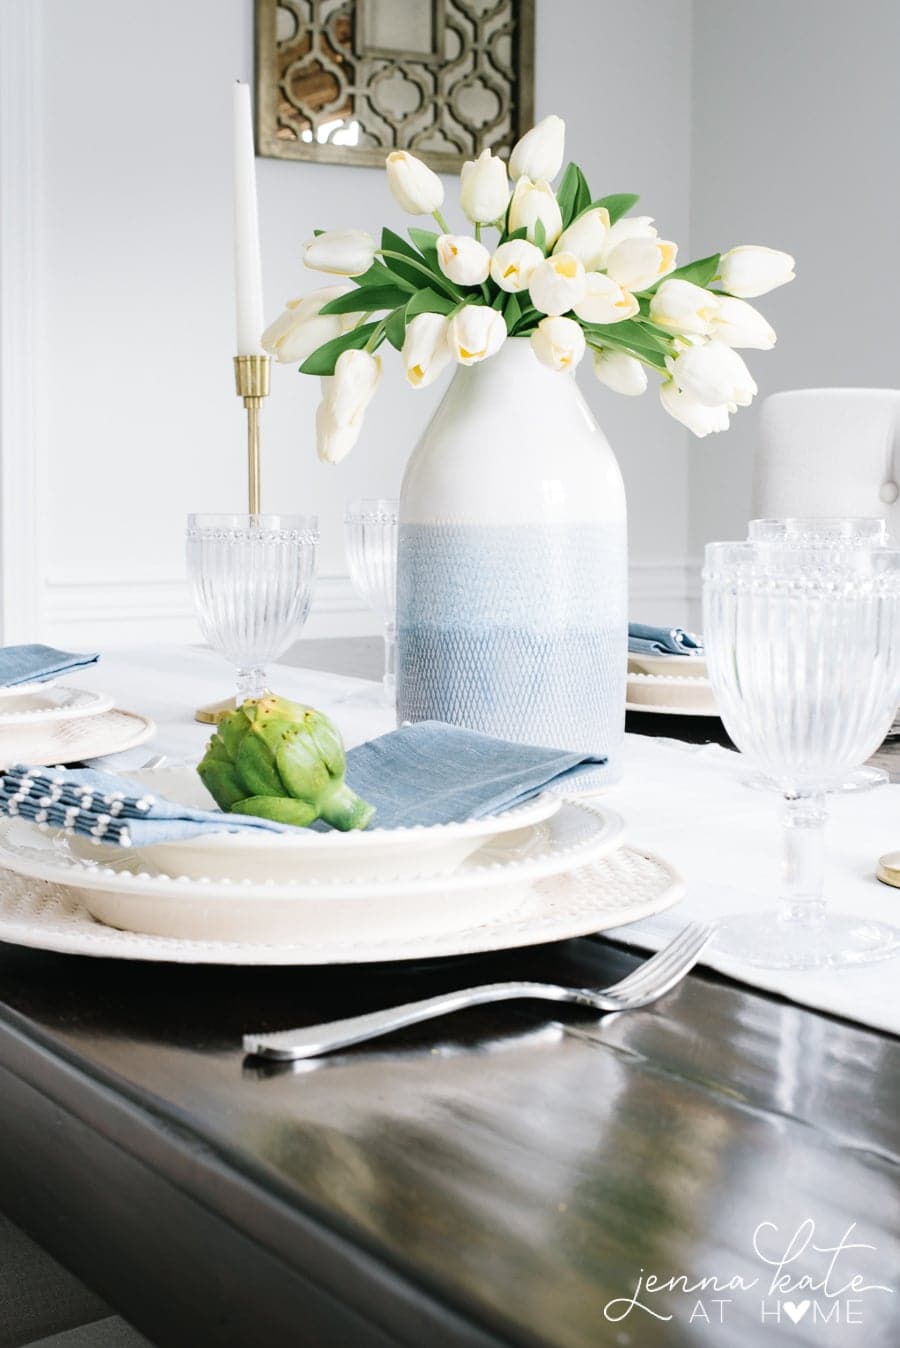 Table setting with a vase full of white tulips